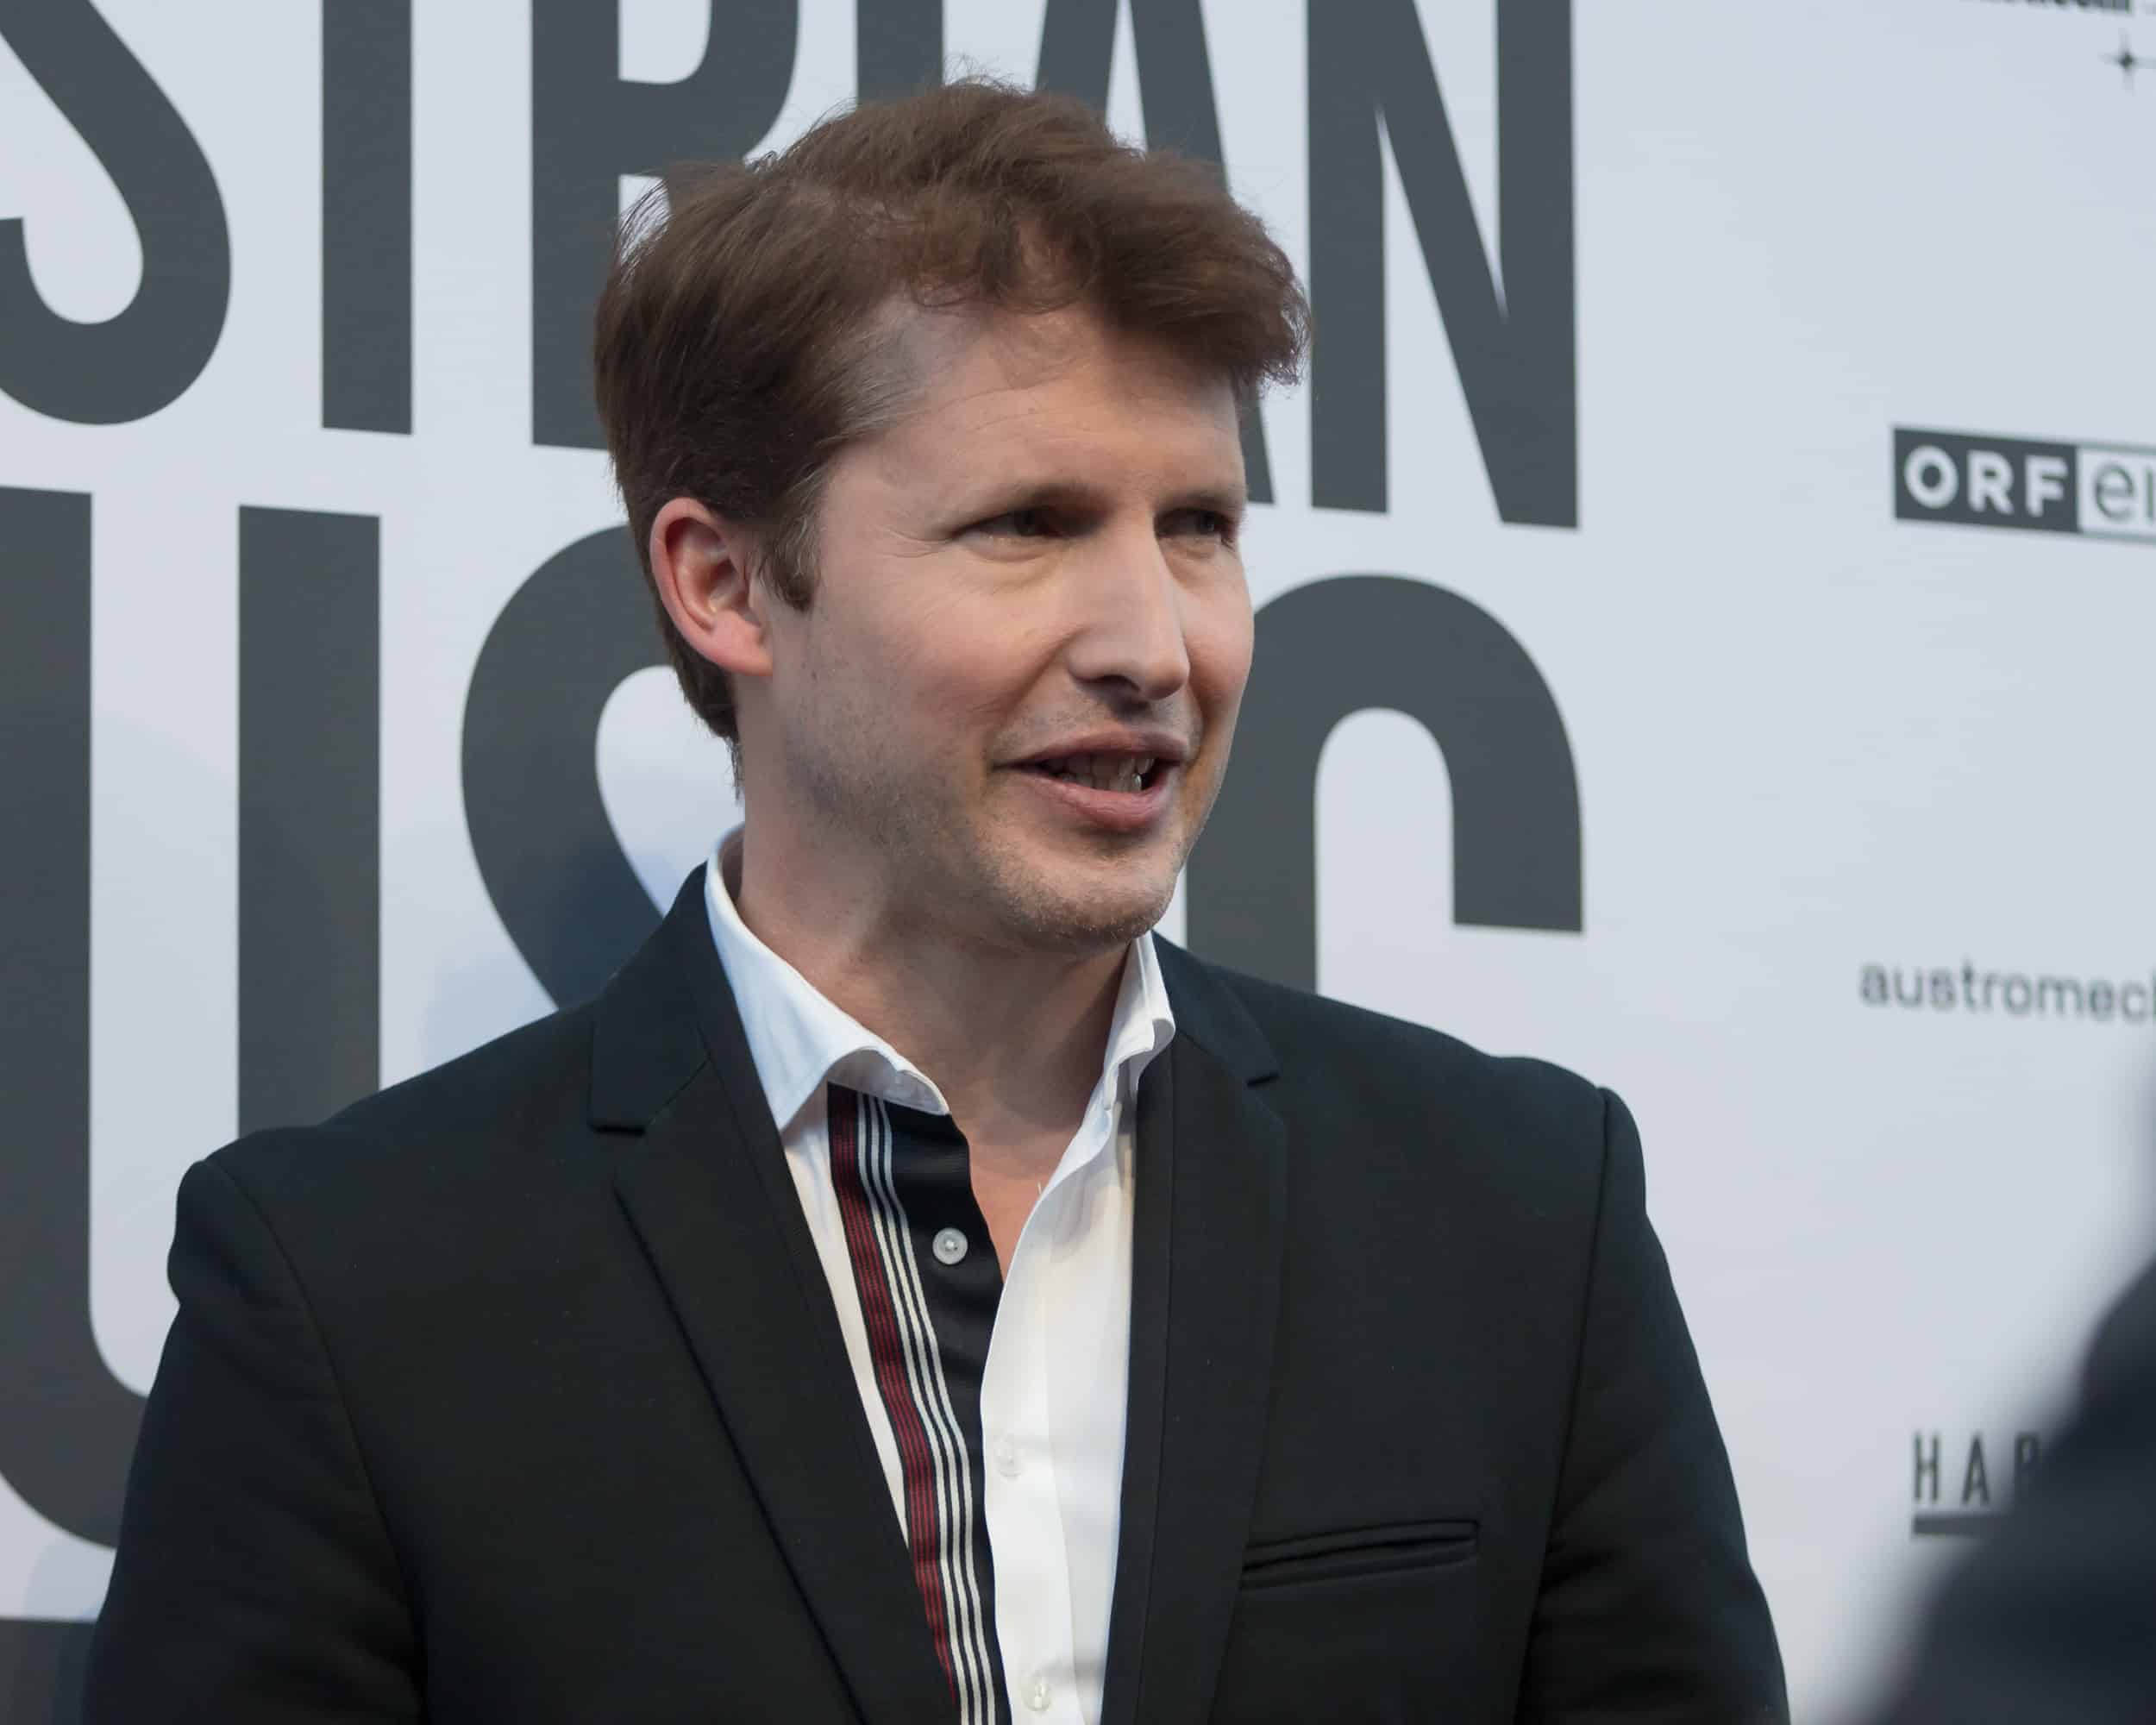 Twitter reacts furiously to James Blunt’s assertion that Brexit wont “change people’s lives”